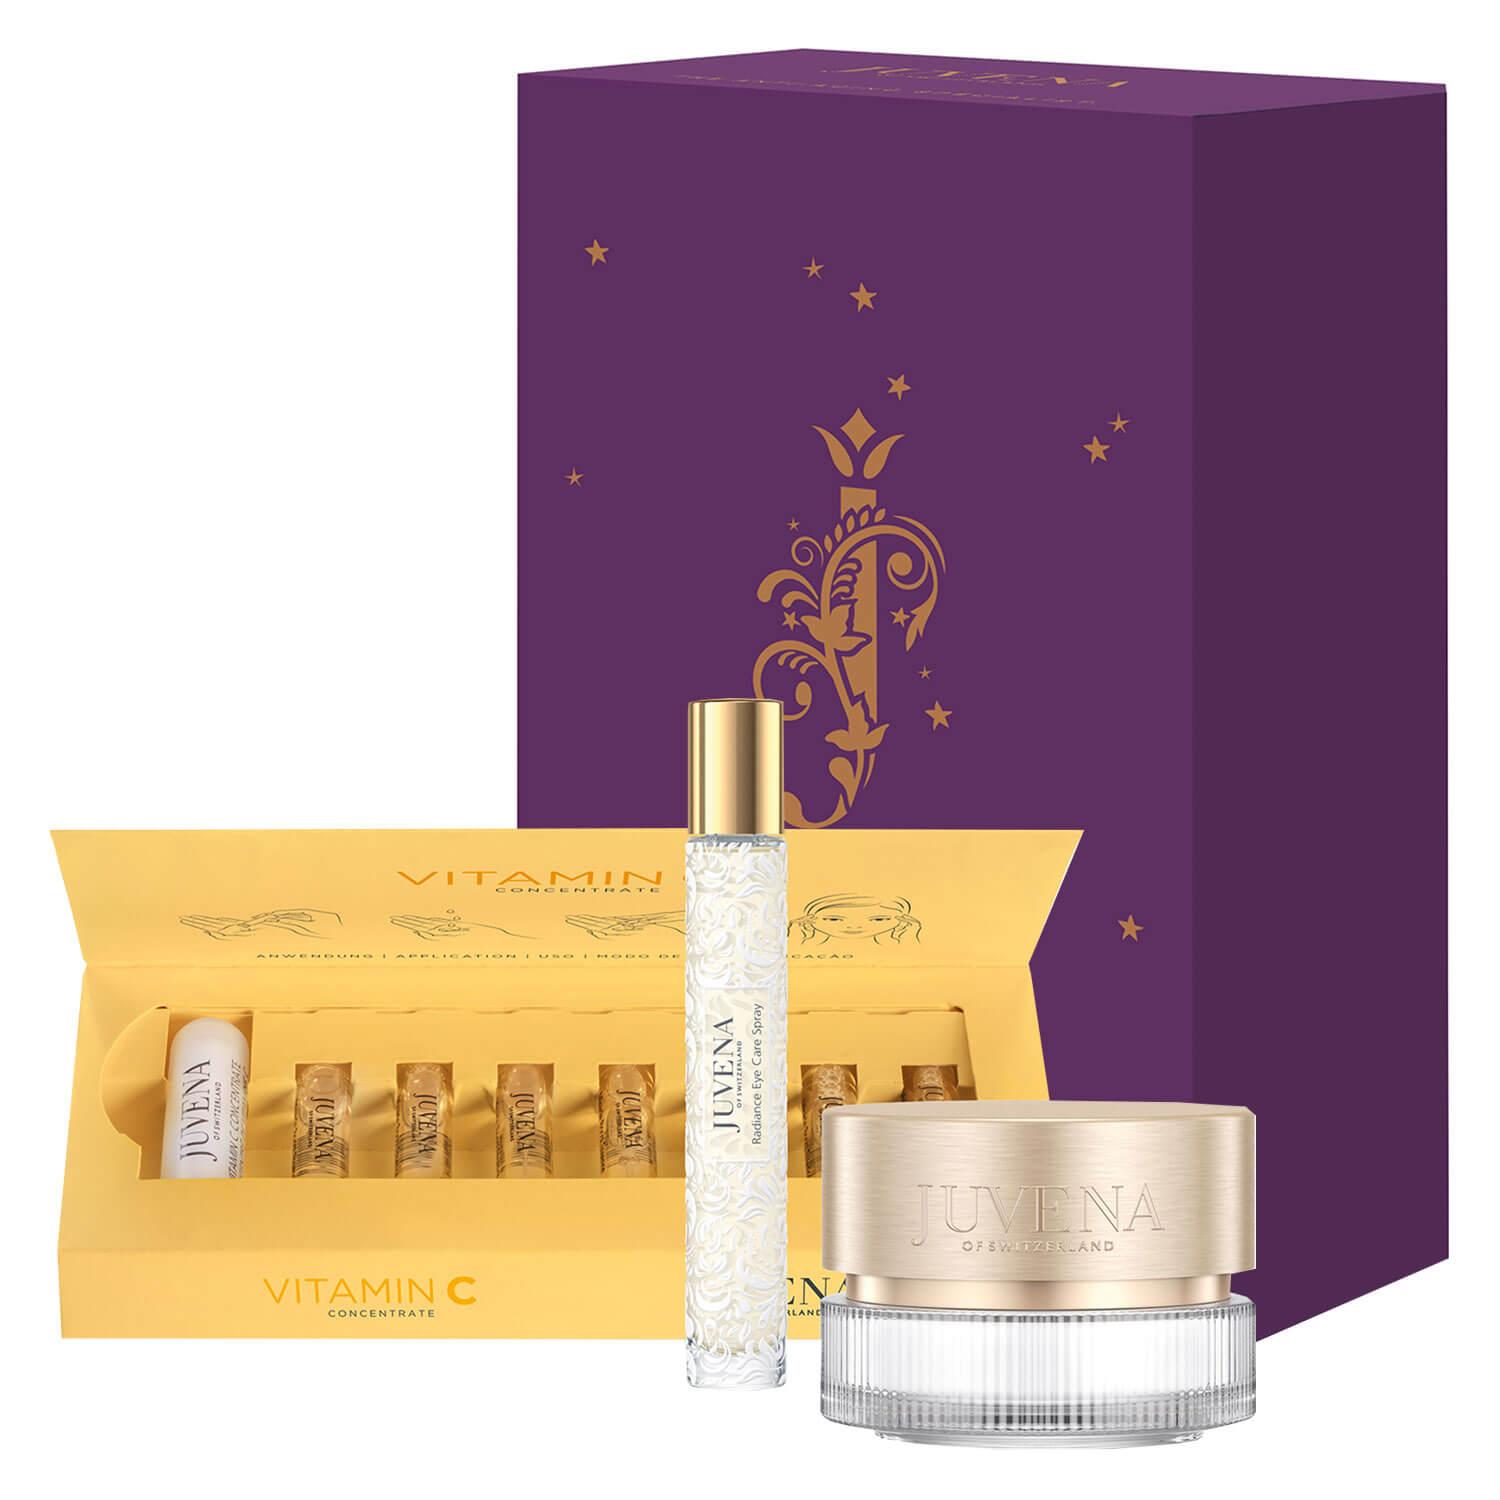 Skin Specialists - Superior Miracle Cream Set